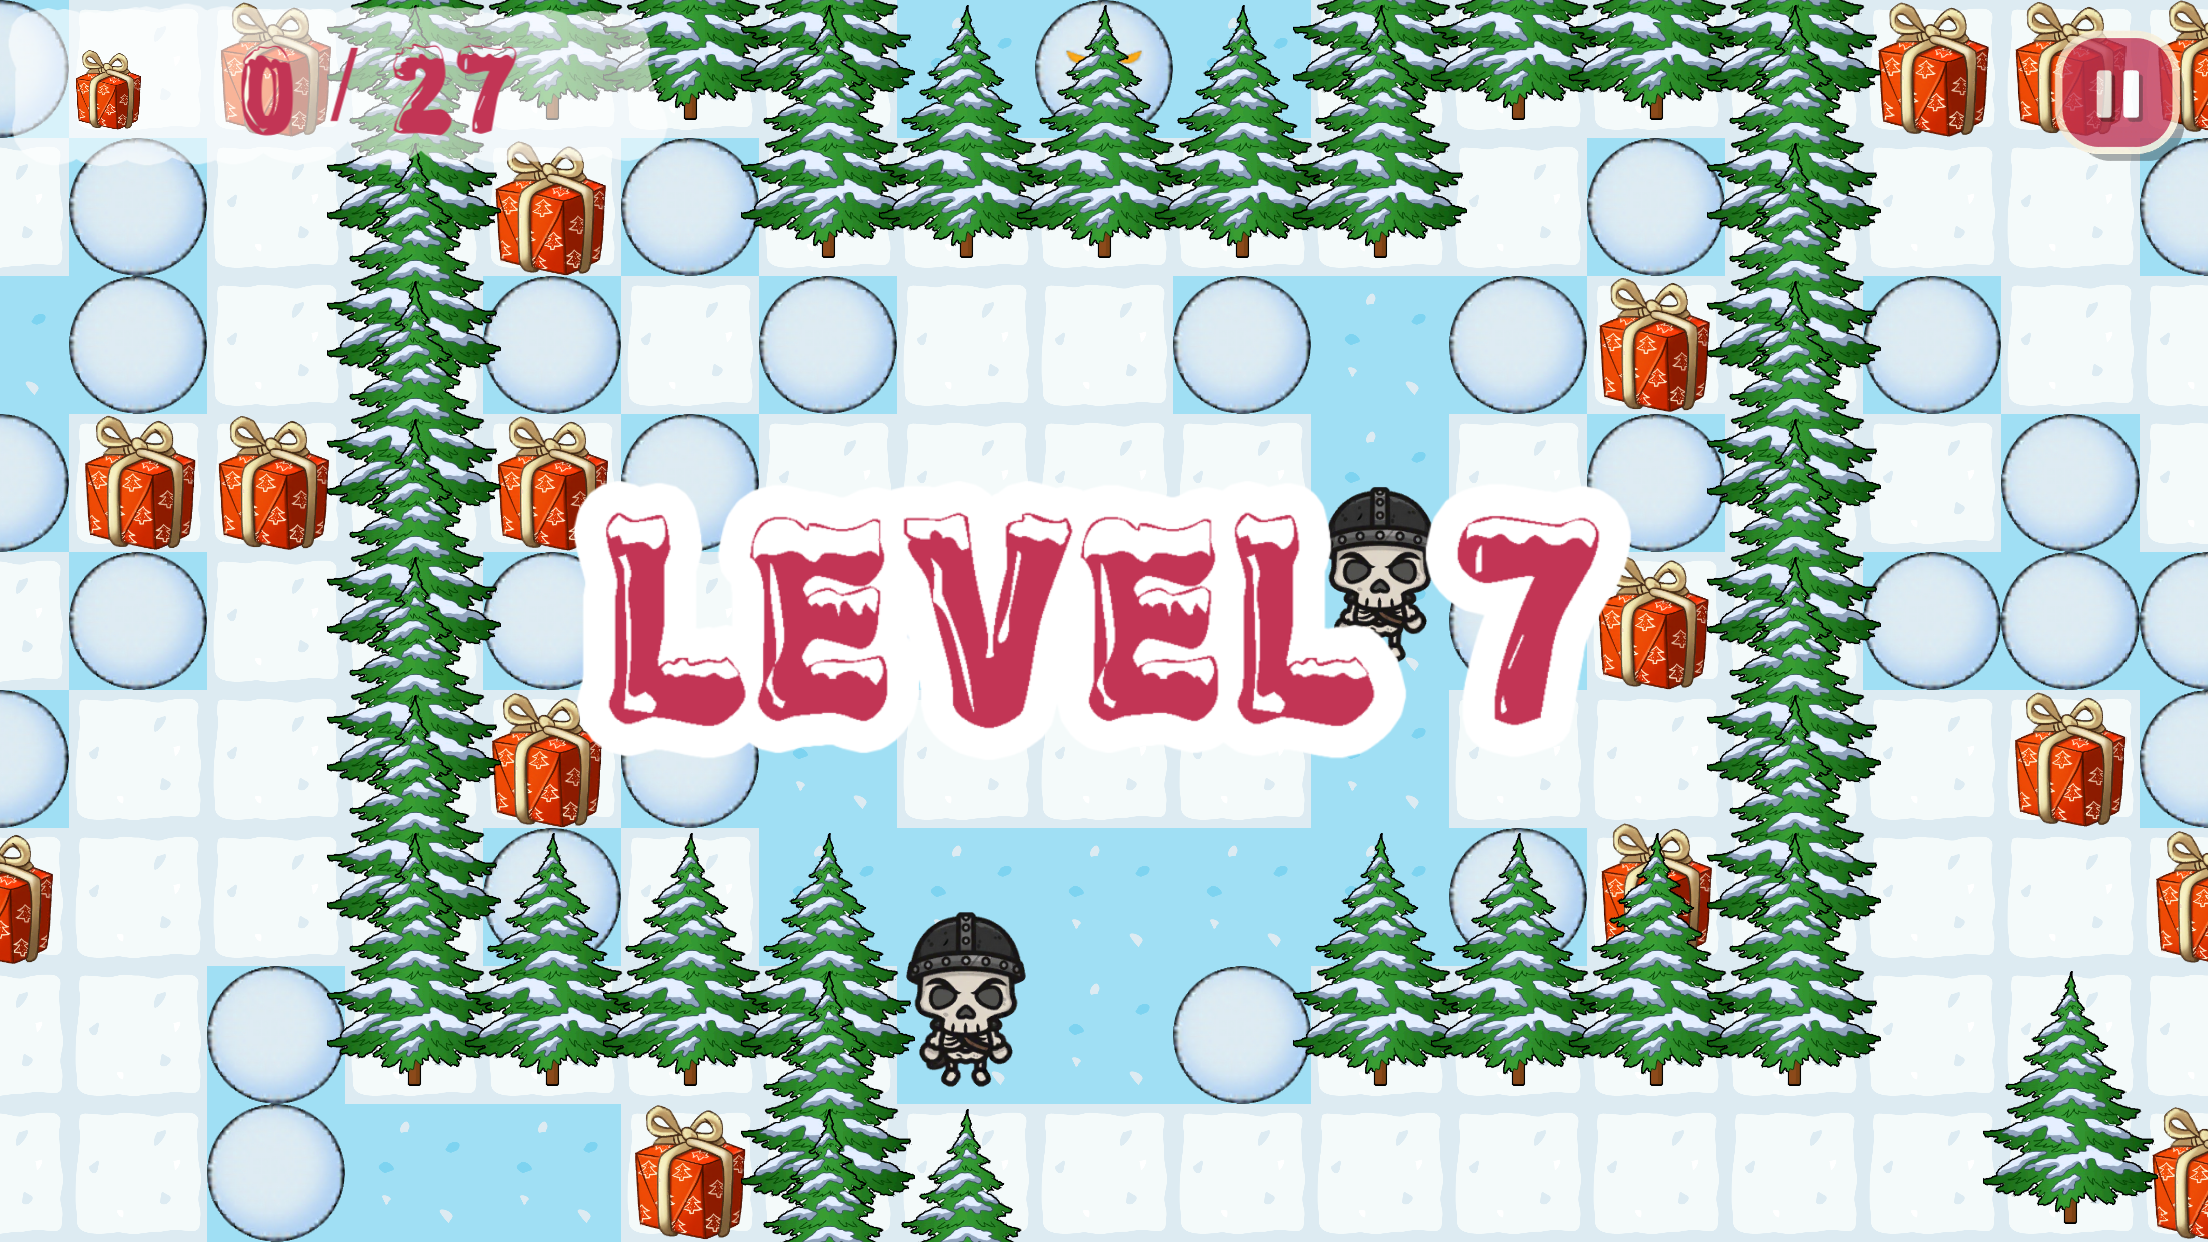 Snowball: Puzzle